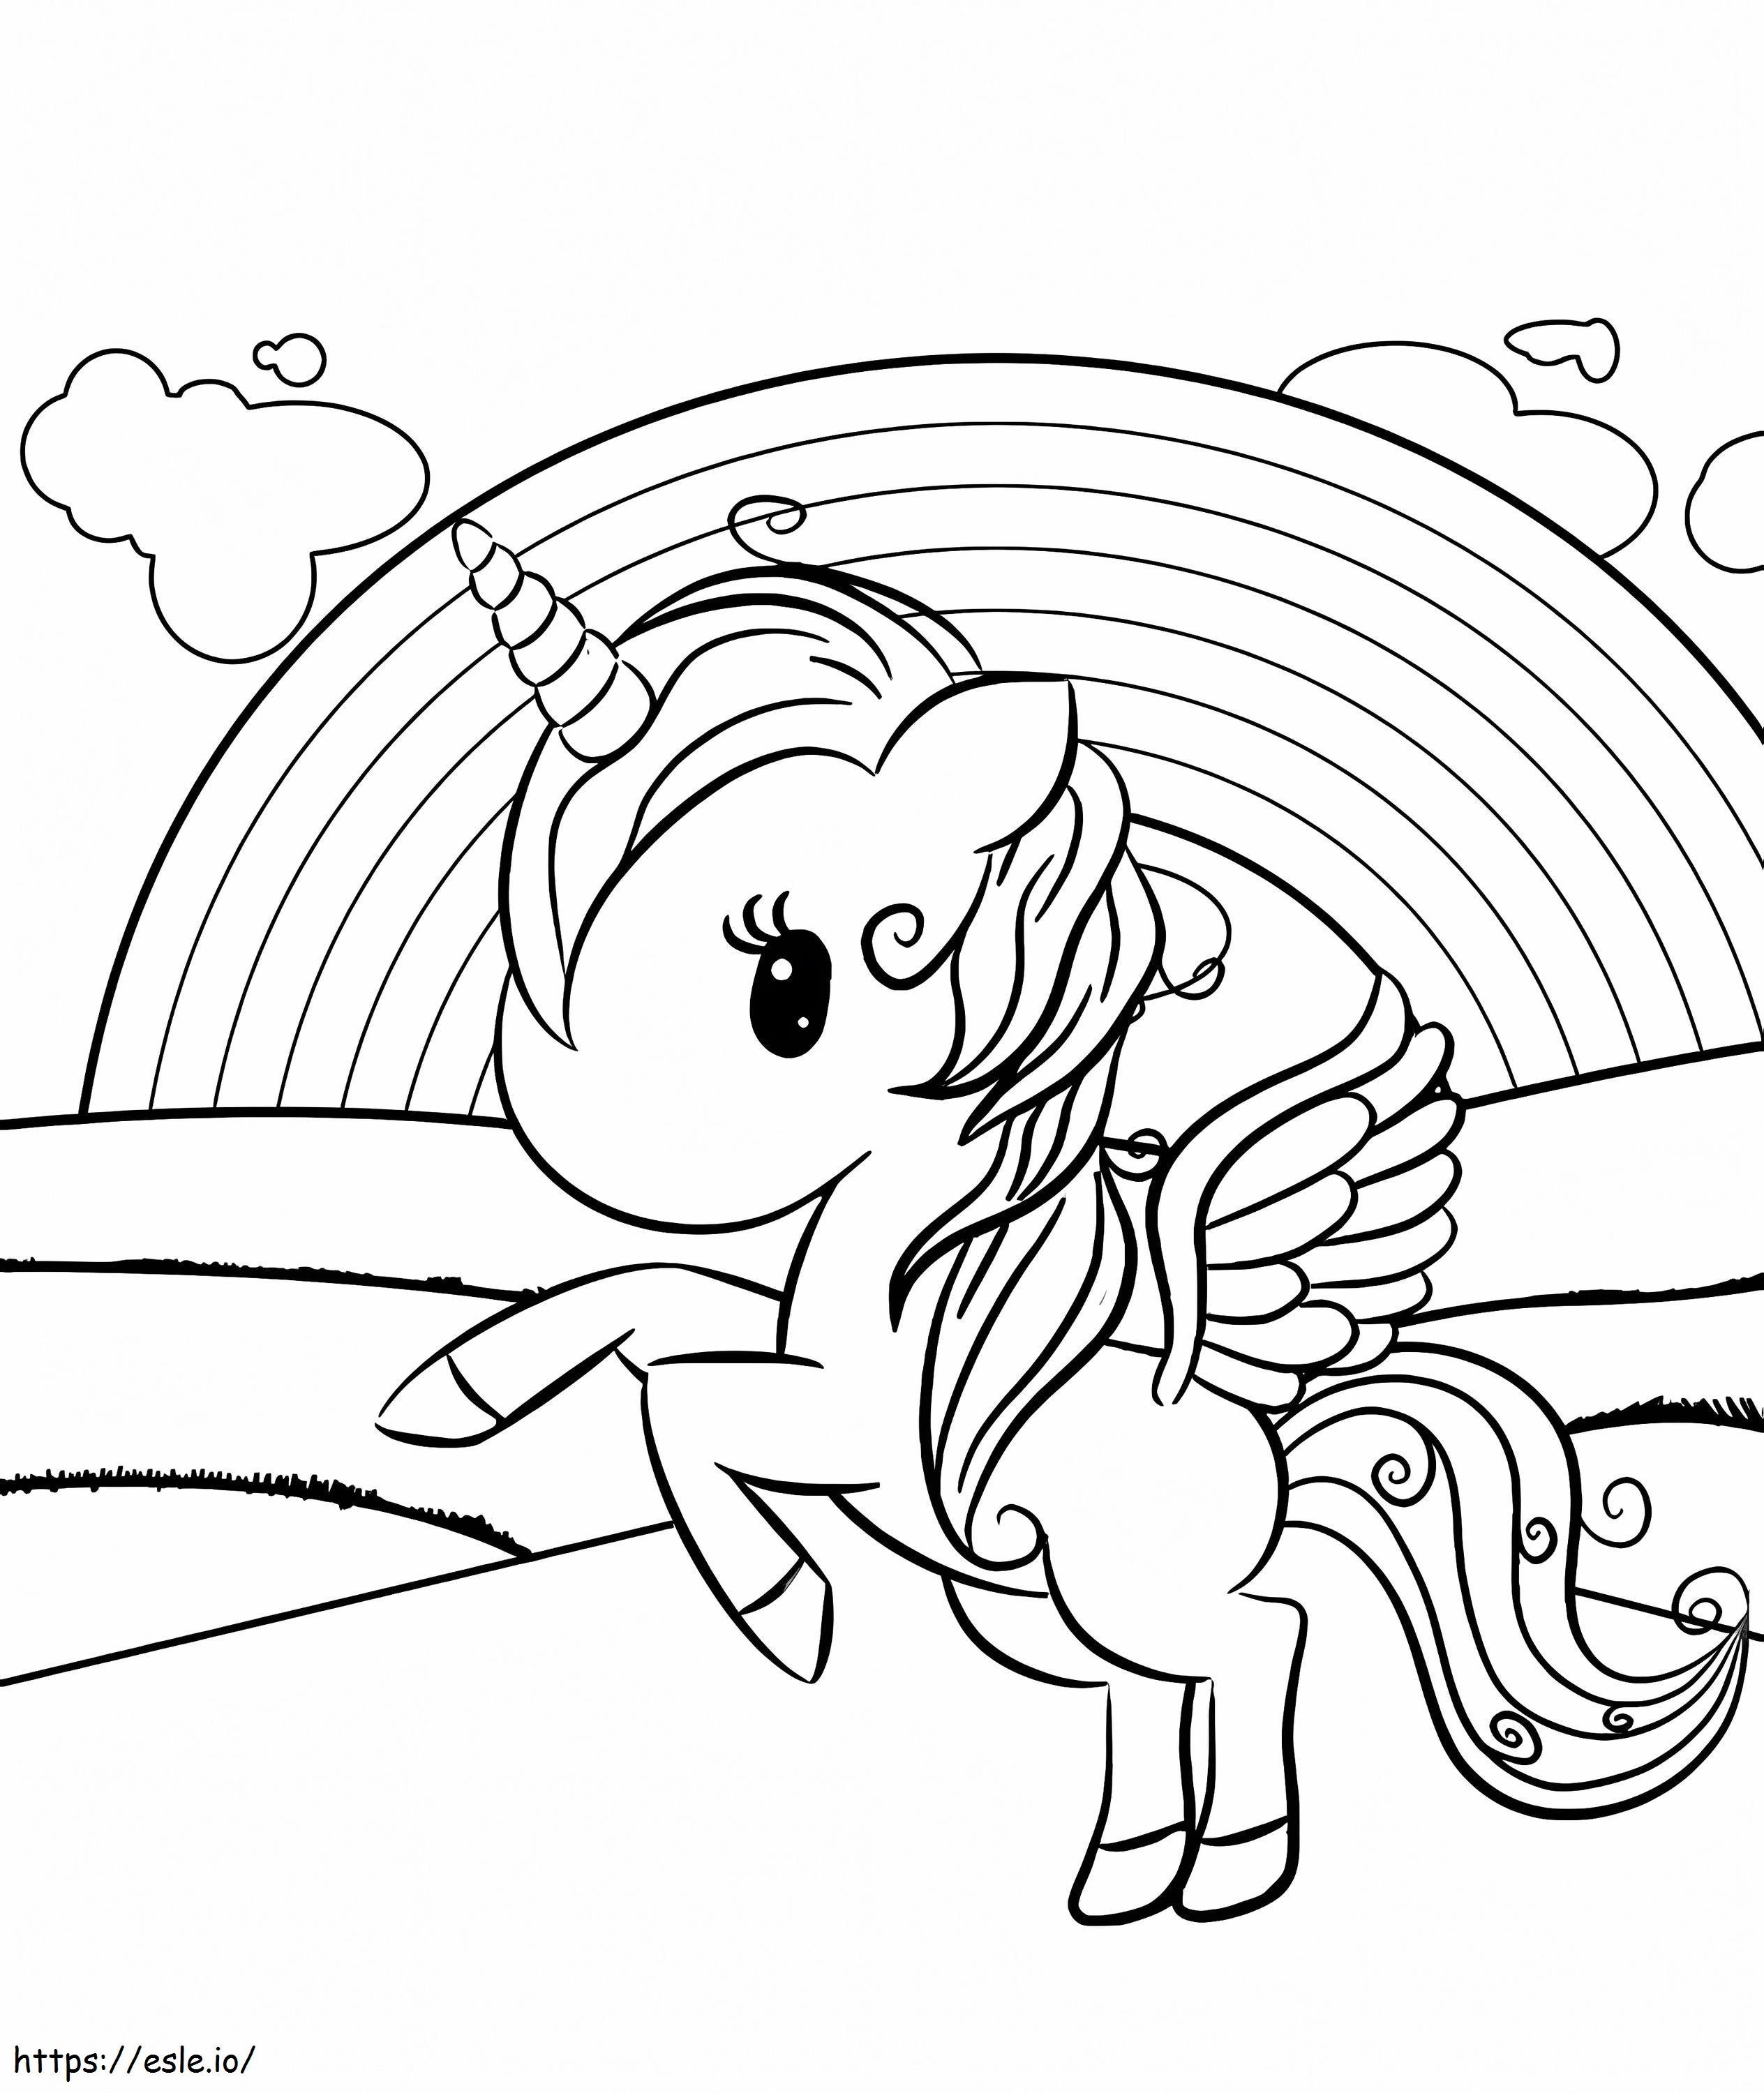 Unicorn Over The Rainbow coloring page